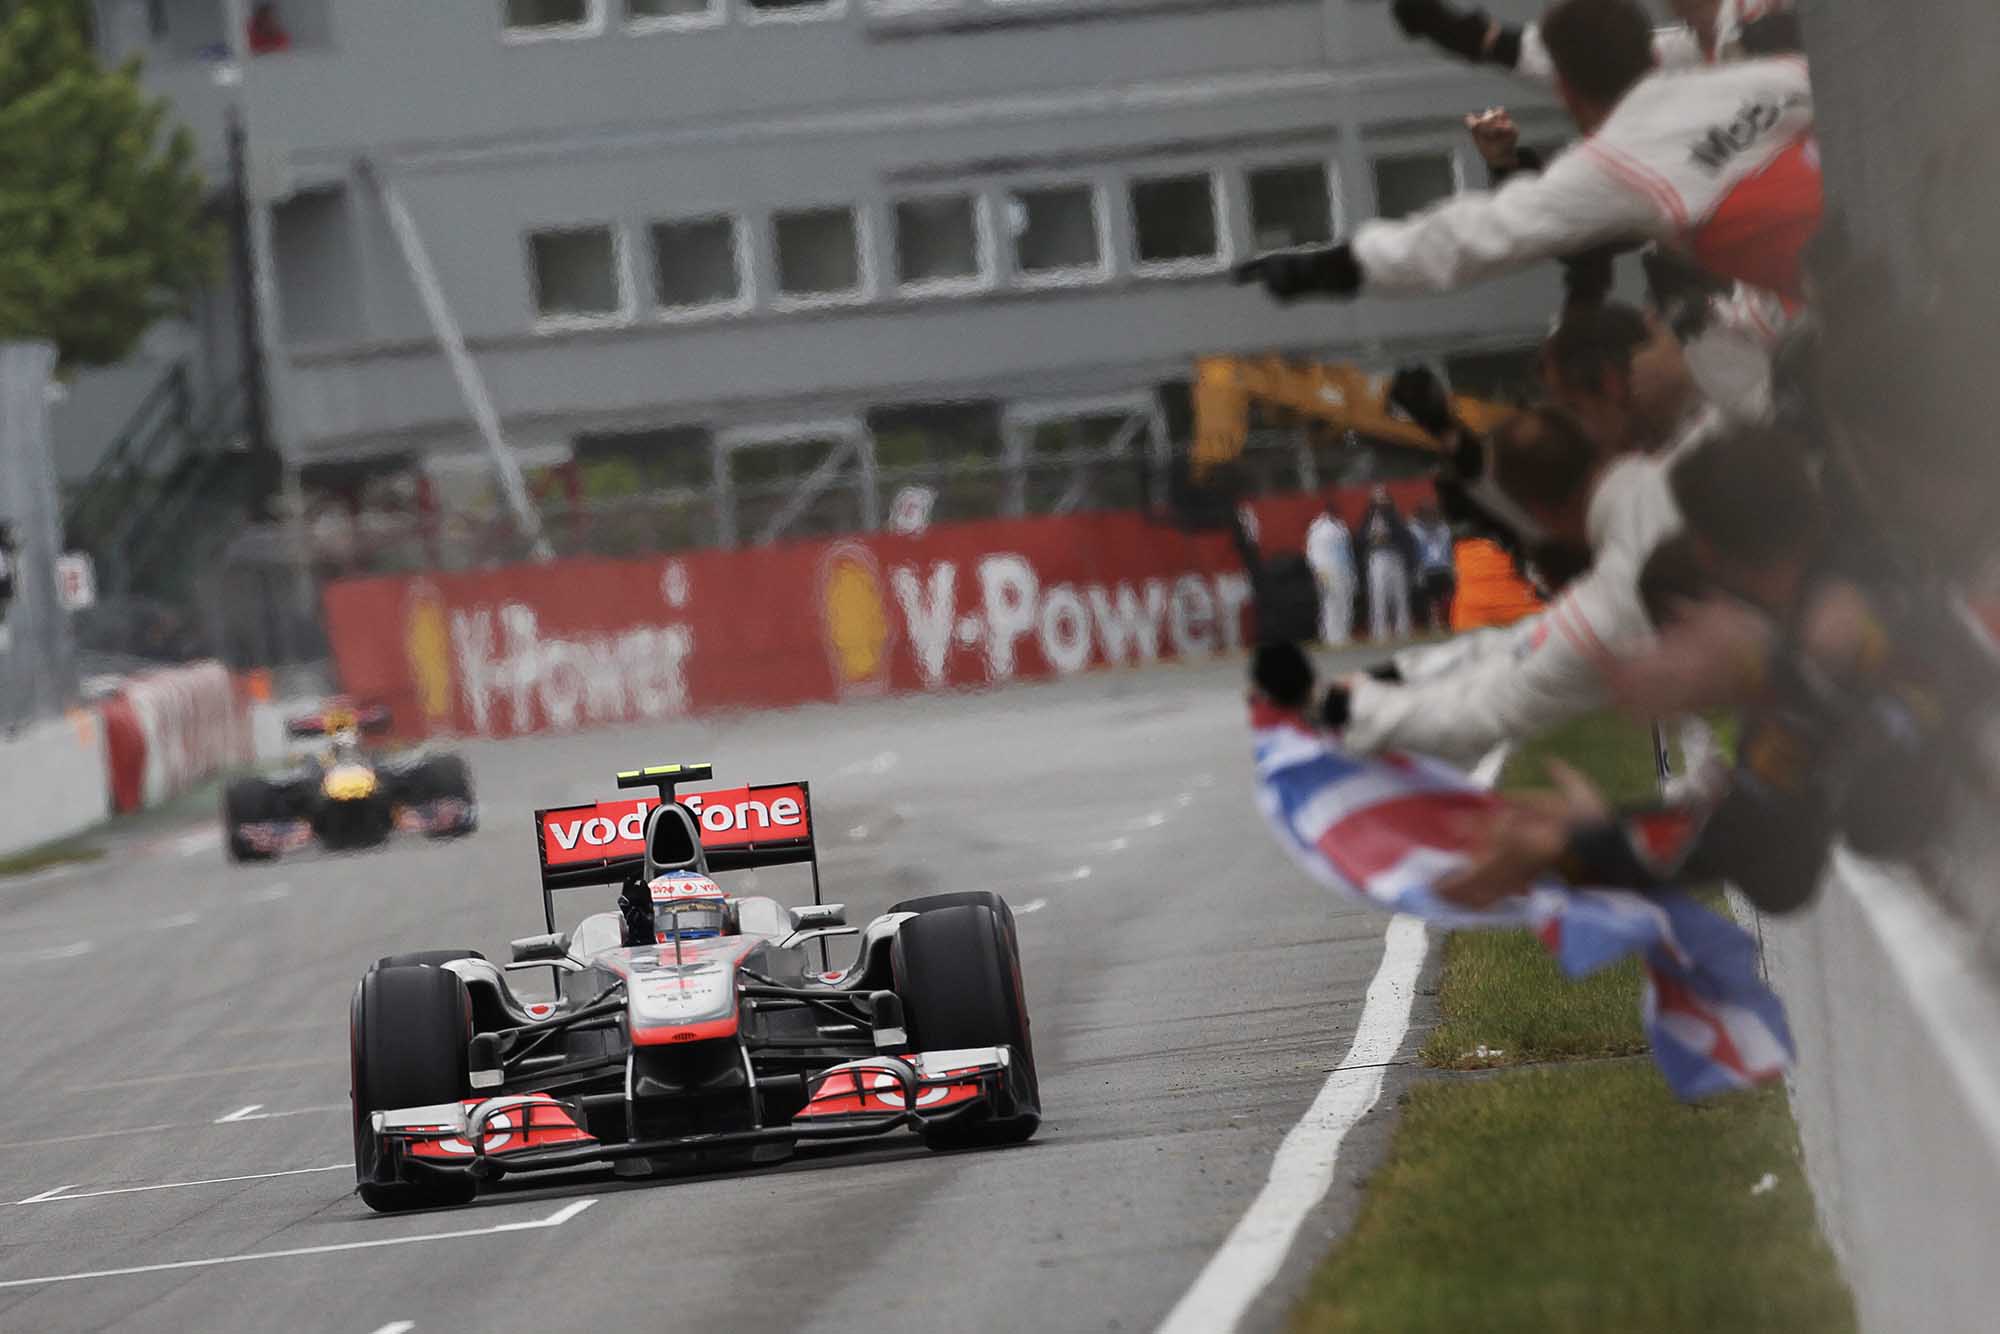 Jenson Button takes the chequered flag to win 2010 Canadian Grand Prix Montreal